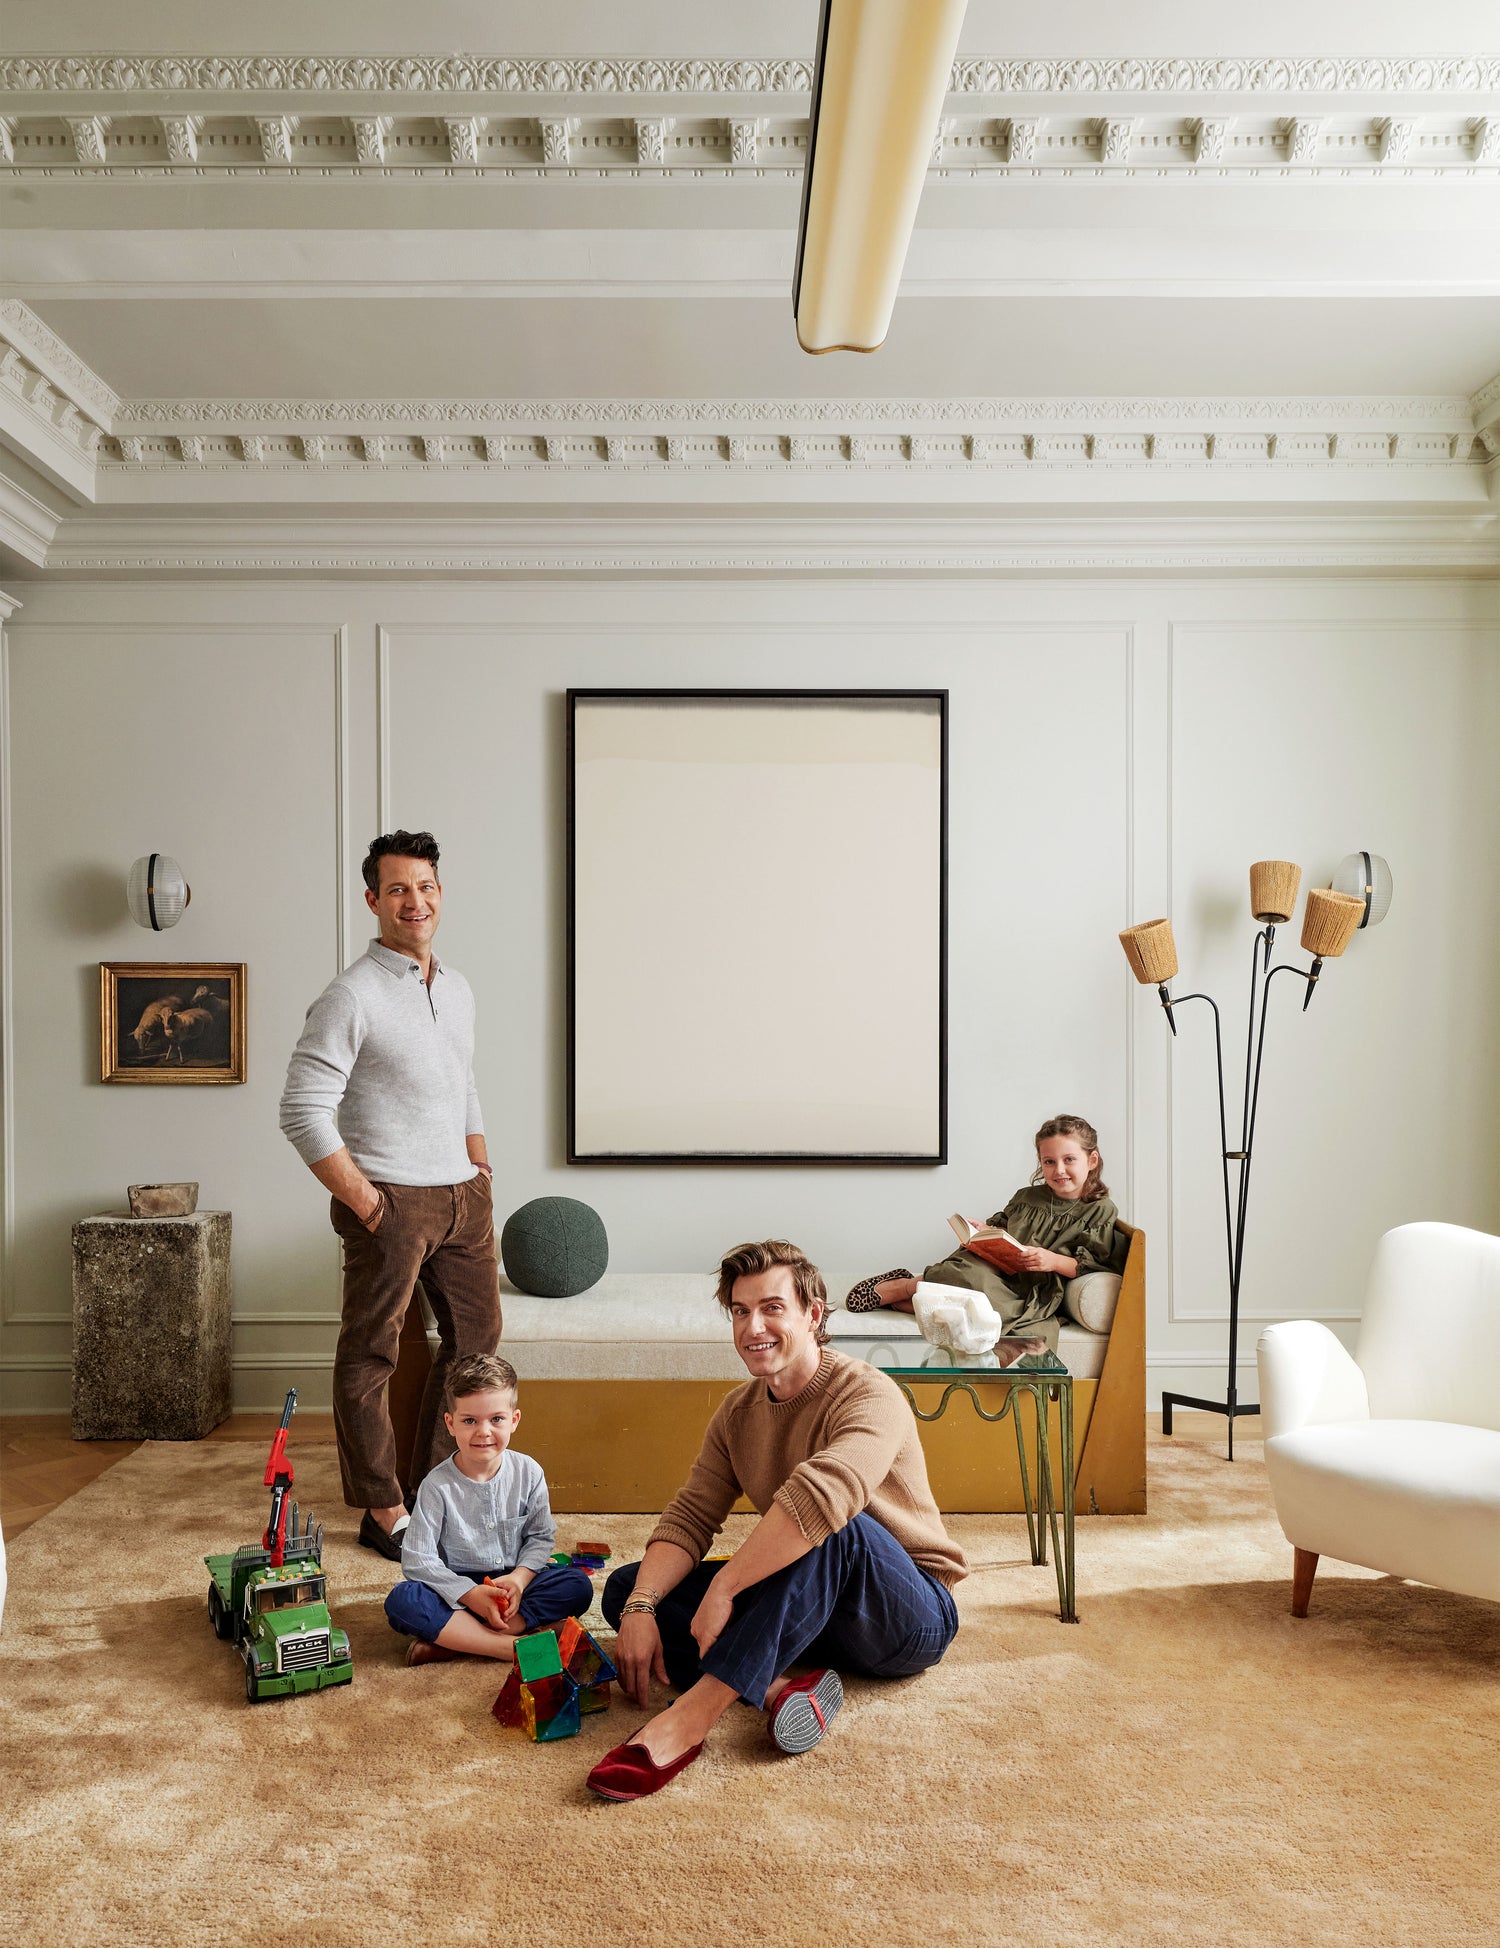 Nate, Jeremiah and their children relax in the living room.